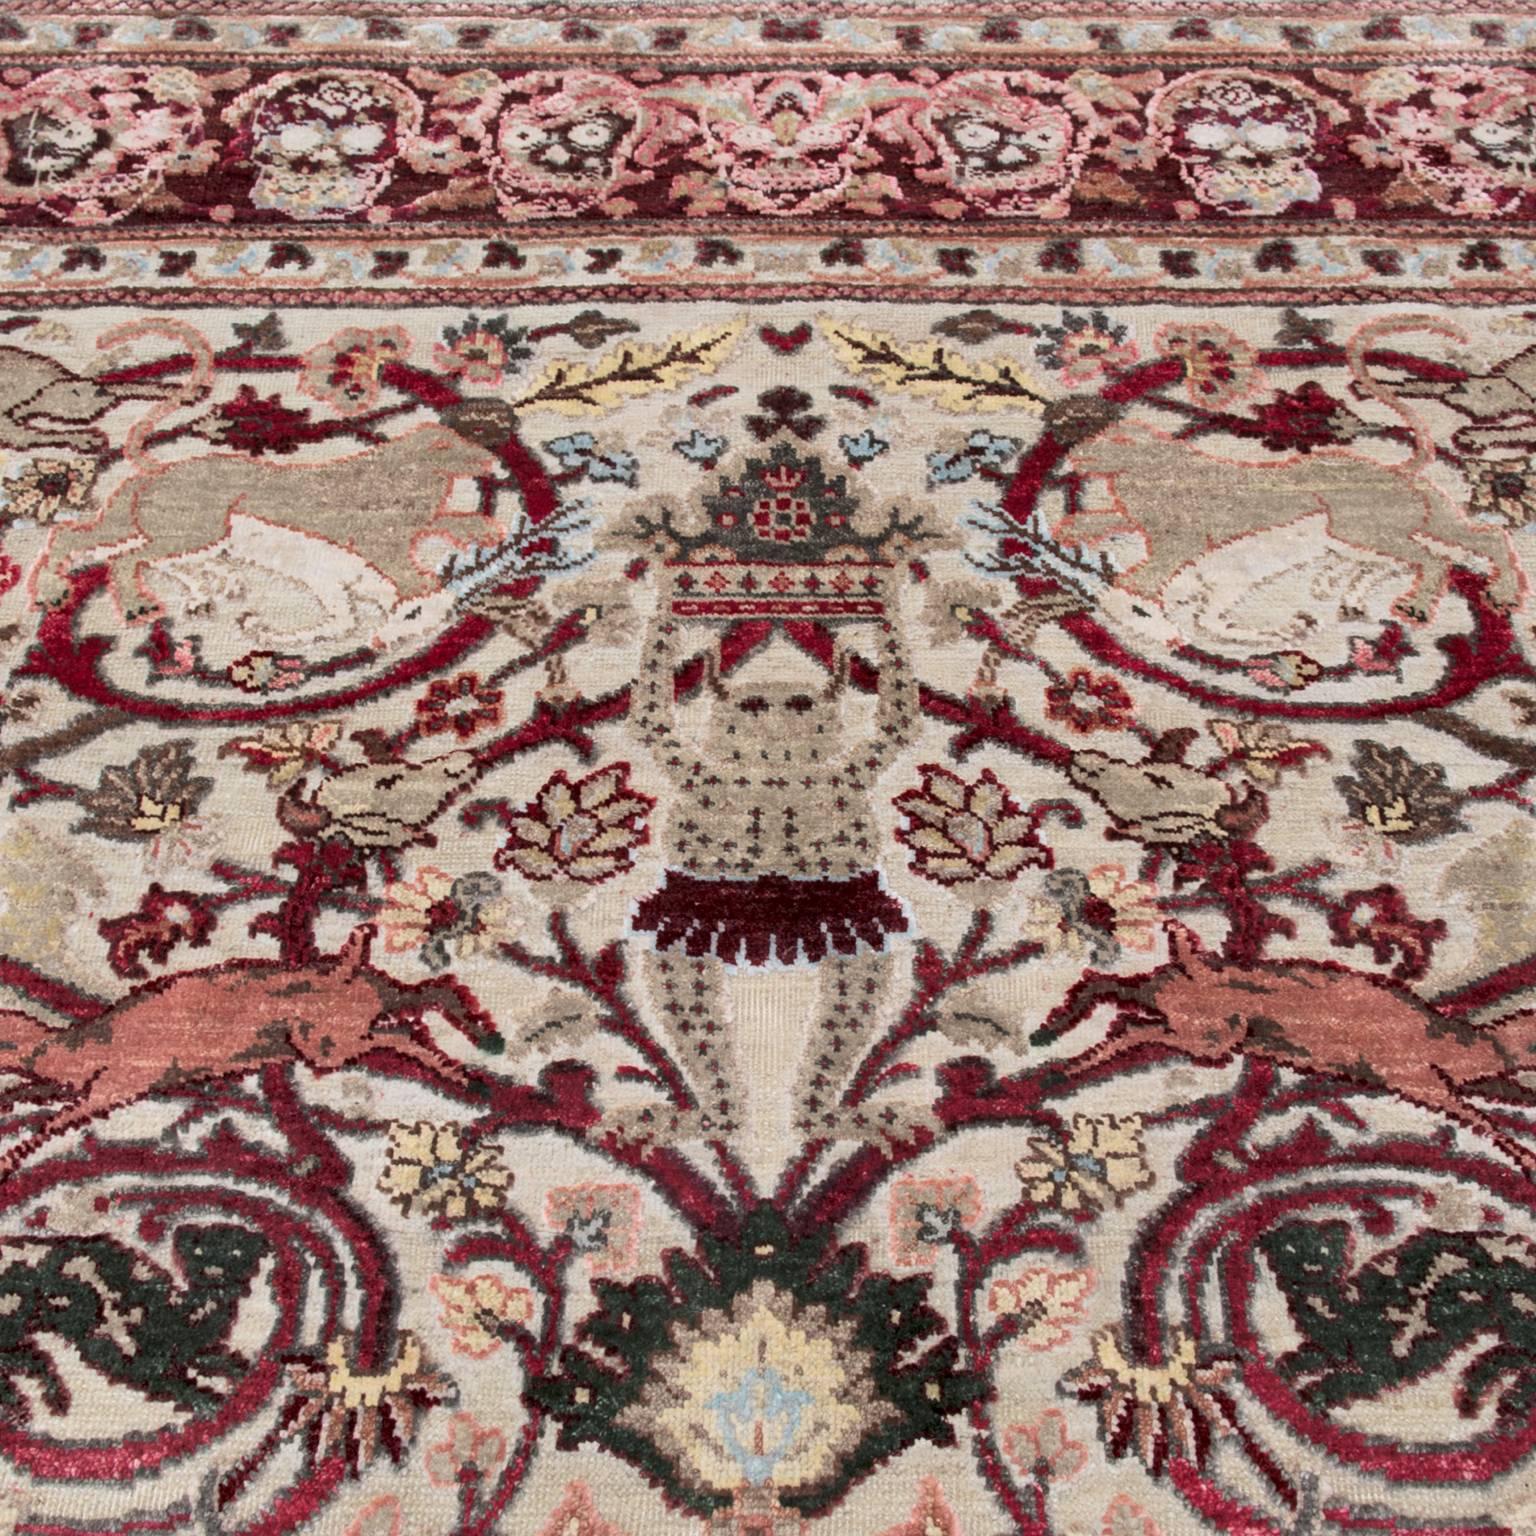 Knots Rugs presents 17th Century Modern Mexican Skulls. Produced in Jaipur in 11/11 Persian knot quality from oxidized wool and silk.
This rug is number 1/10 of this special Limited Edition collection produced by Knots Rugs. This rug is based on a